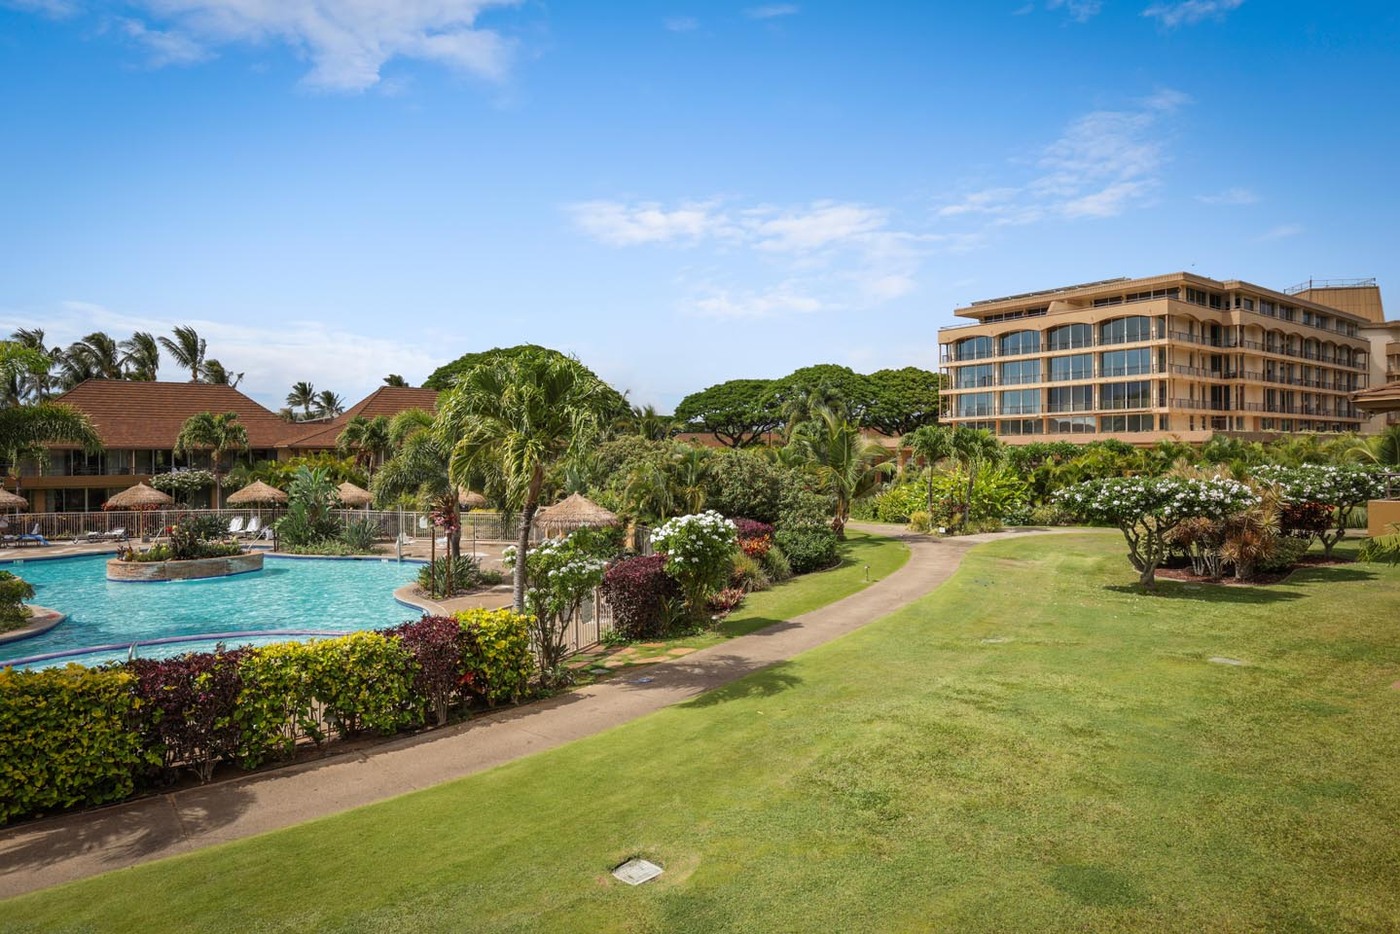 Oceanside Pool and Resort Grounds